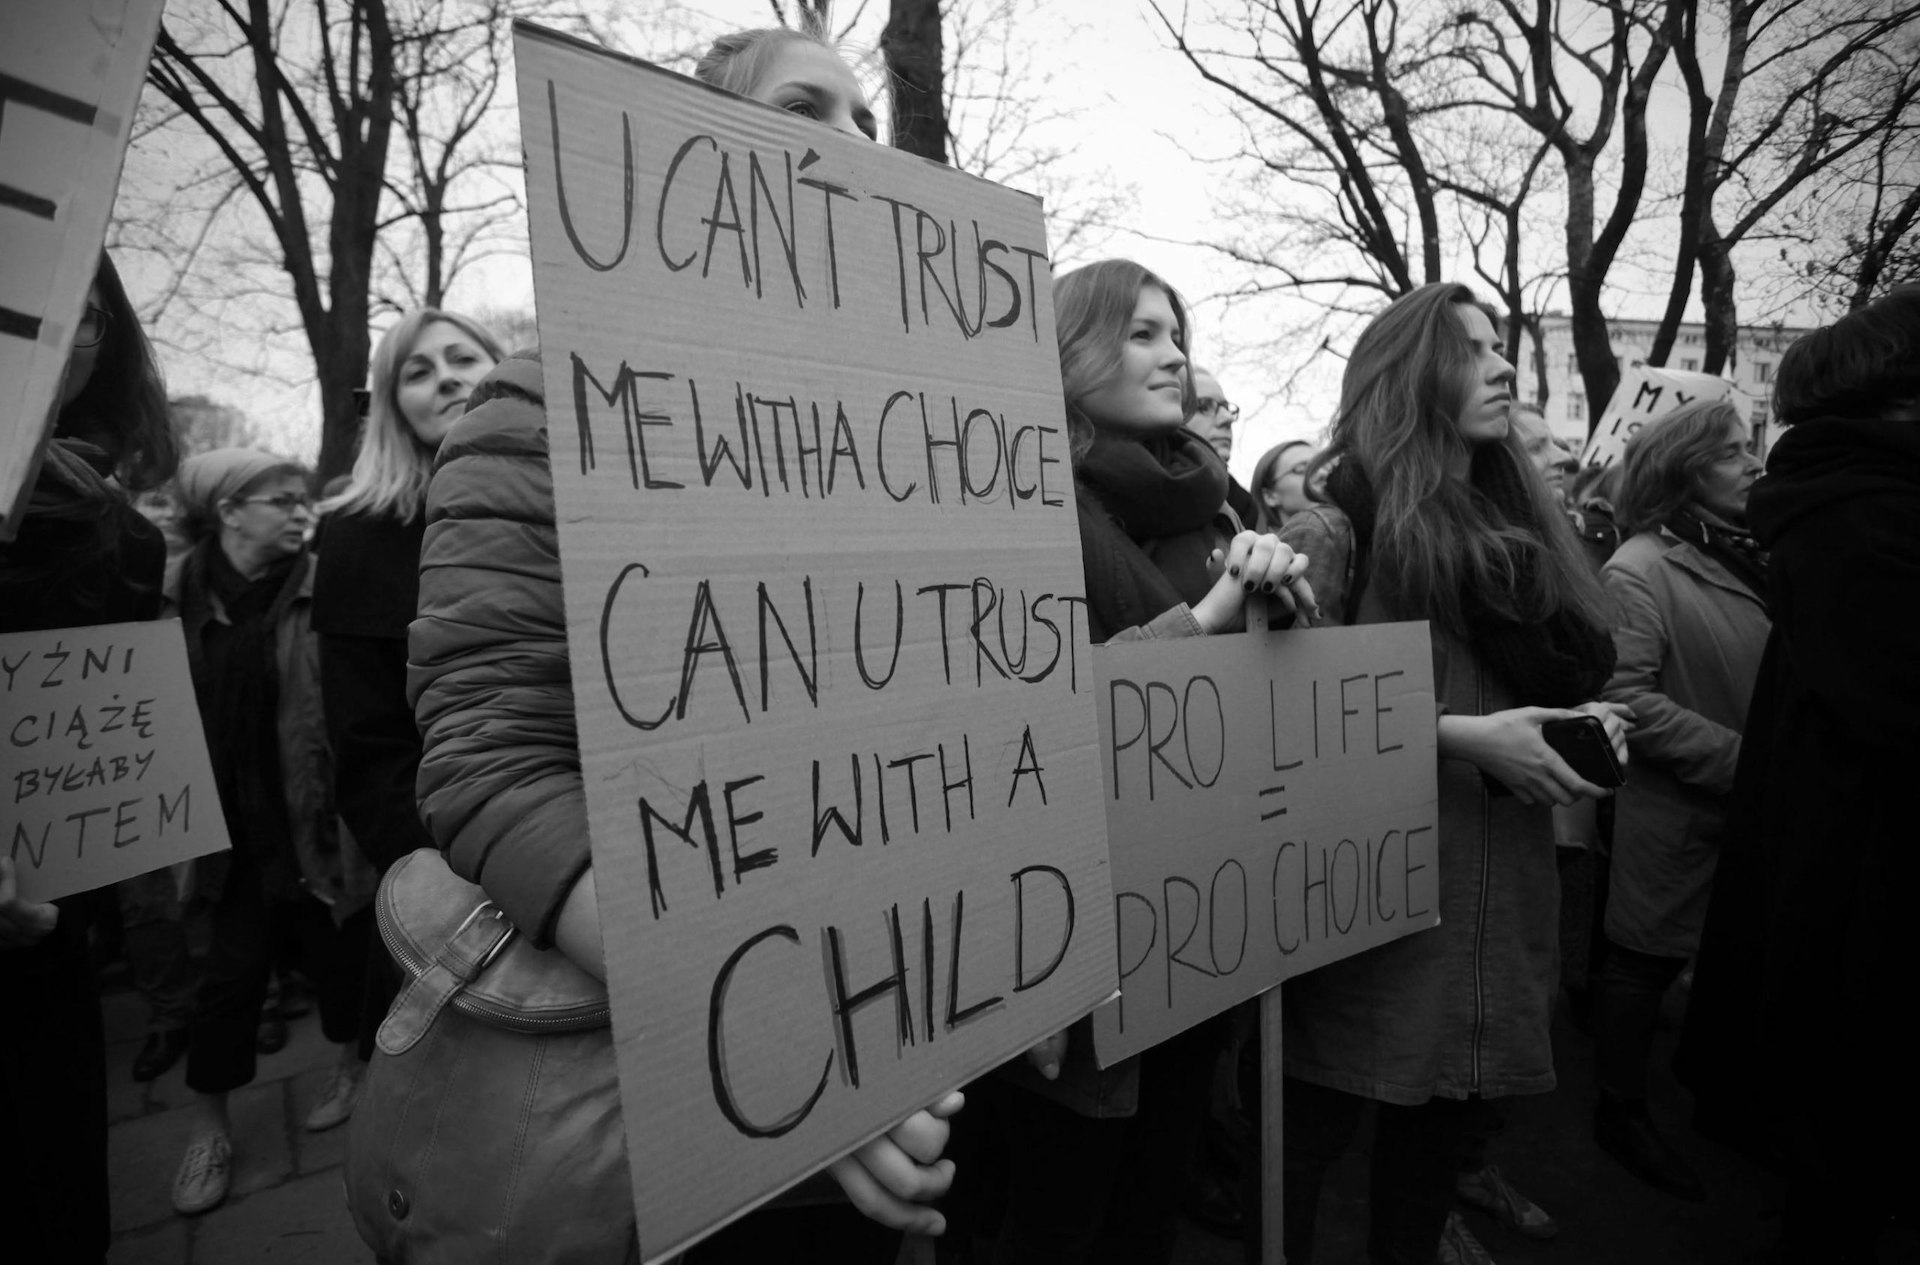 The activists helping Polish people access safe abortions